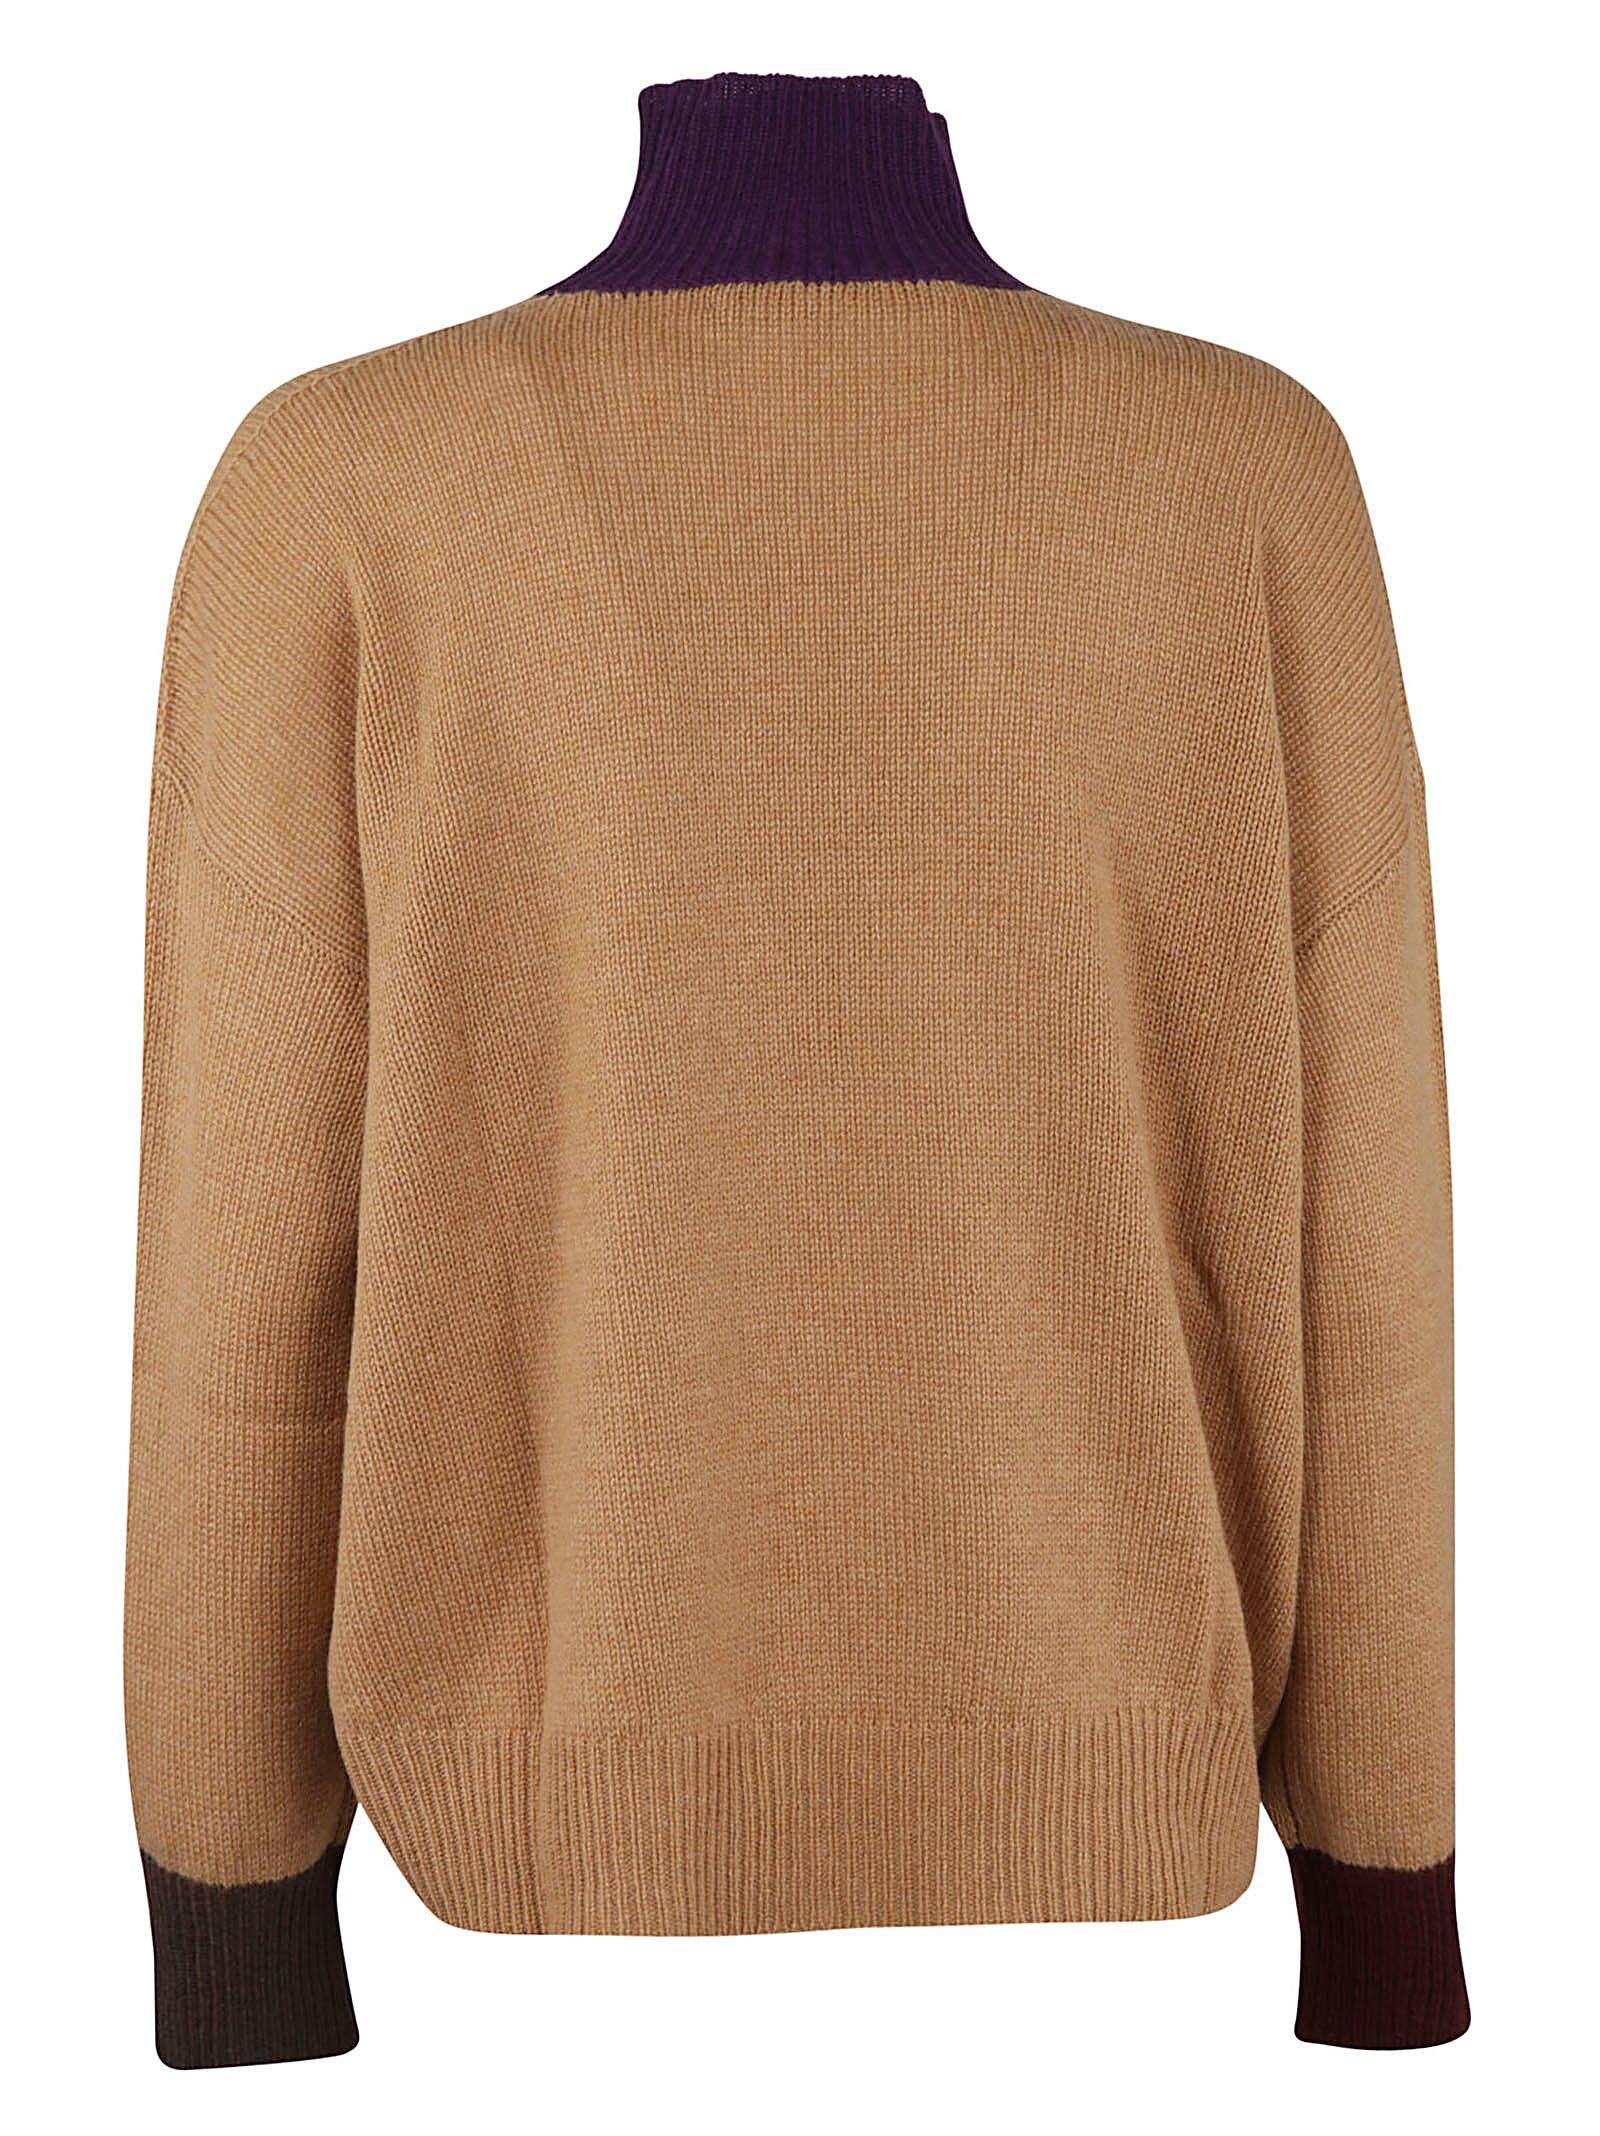 italist | Best price in the market for Marni Marni Contrast Sweater ...